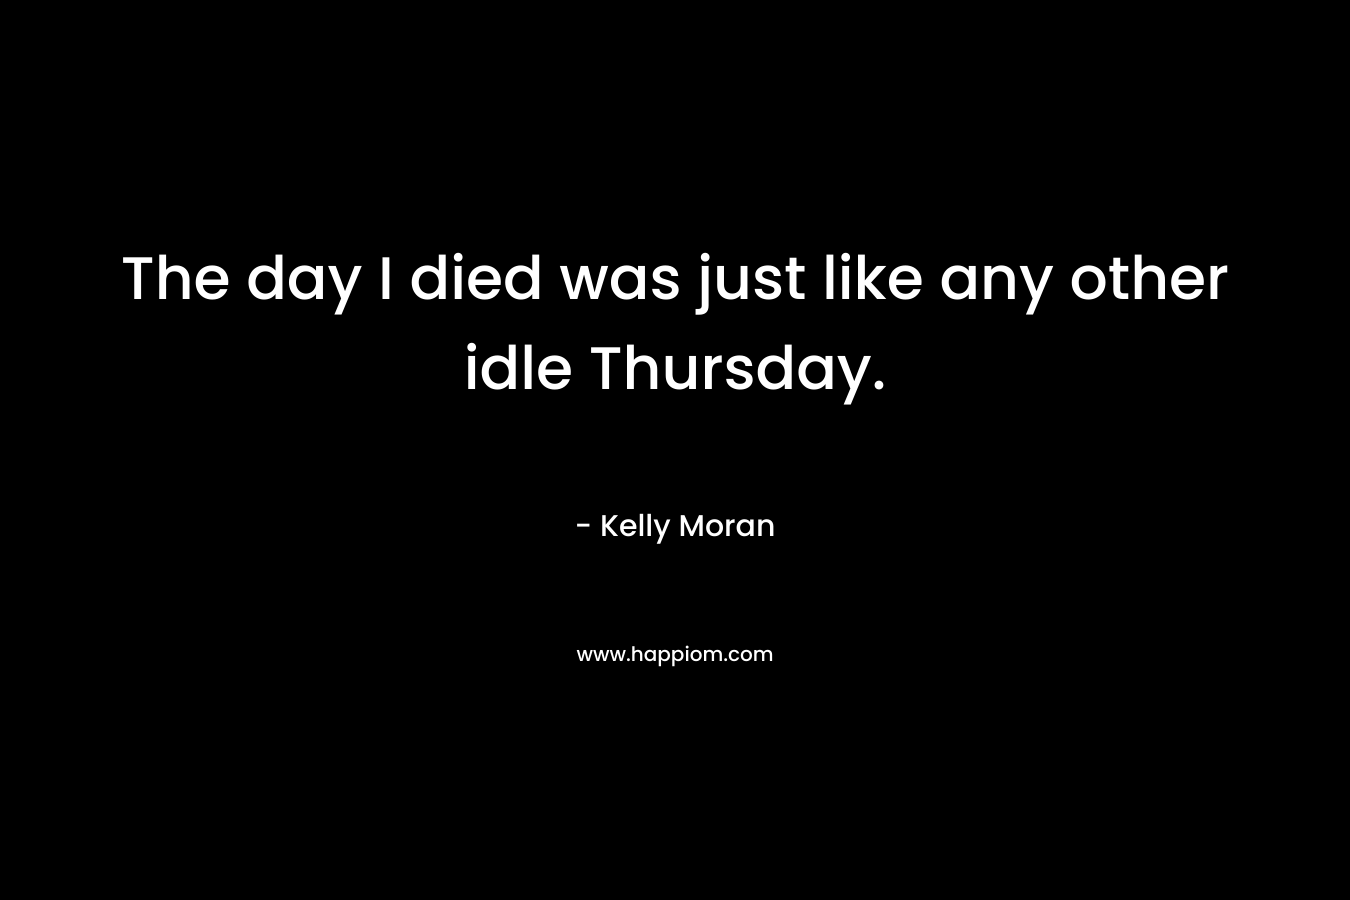 The day I died was just like any other idle Thursday.